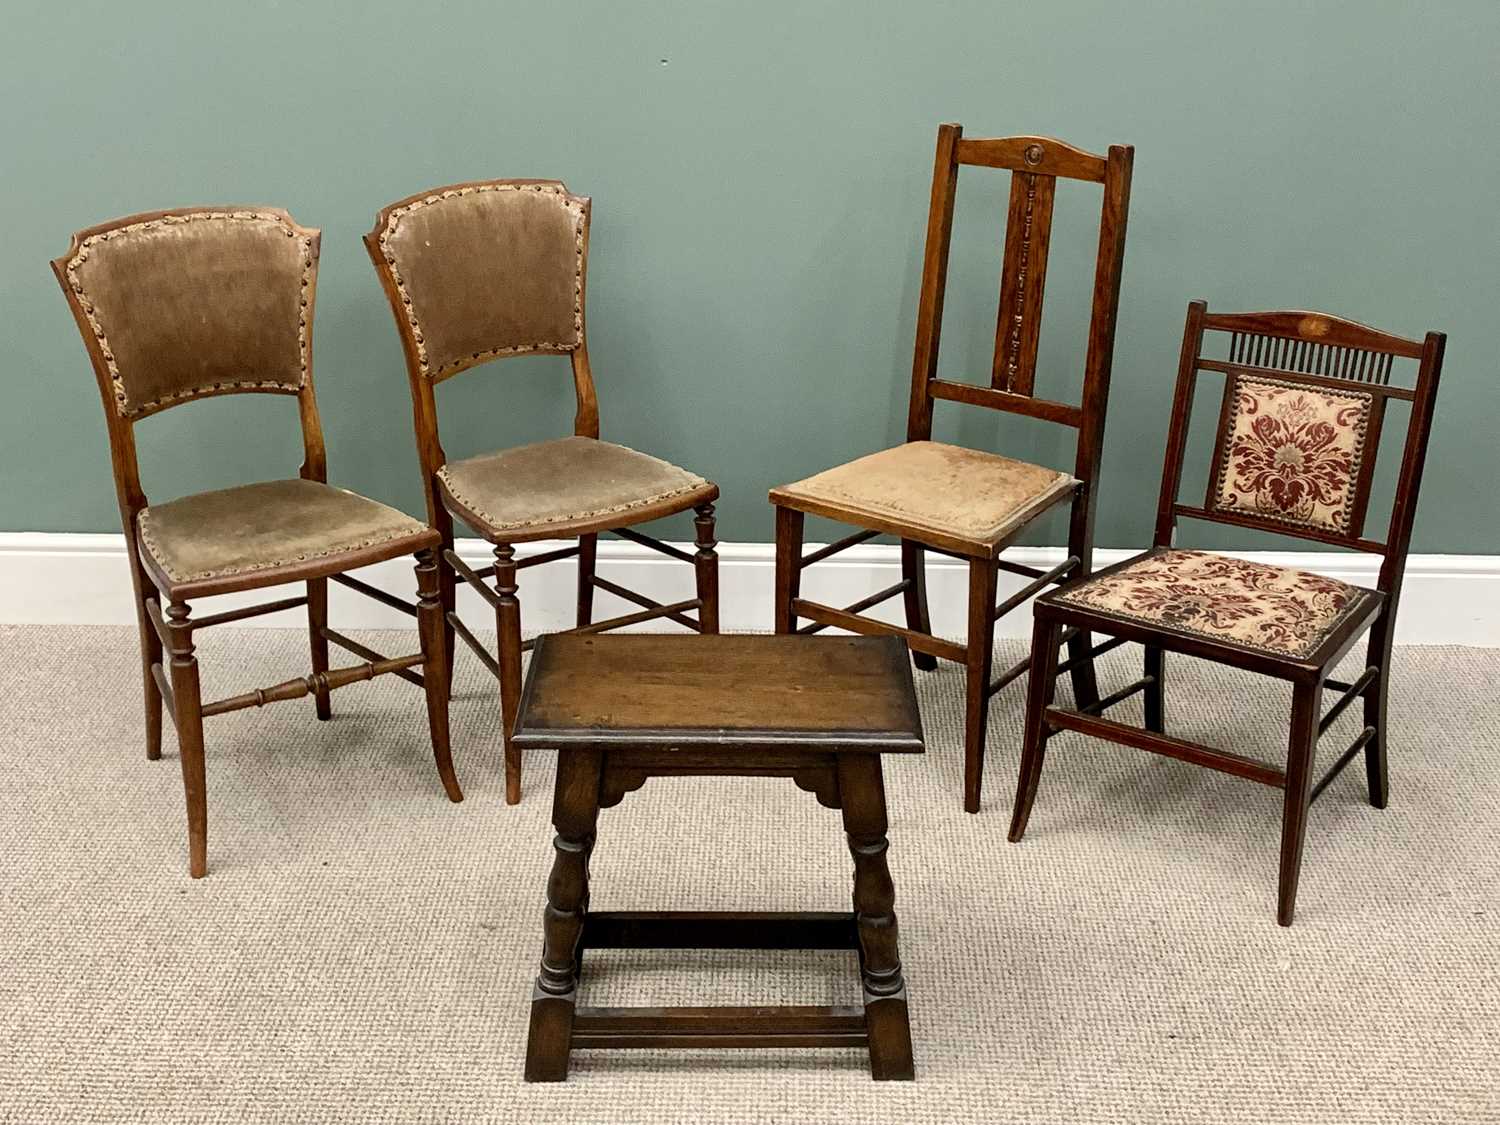 FURNITURE PARCEL - two beech framed bedroom chairs, two other bedroom chairs and a reproduction